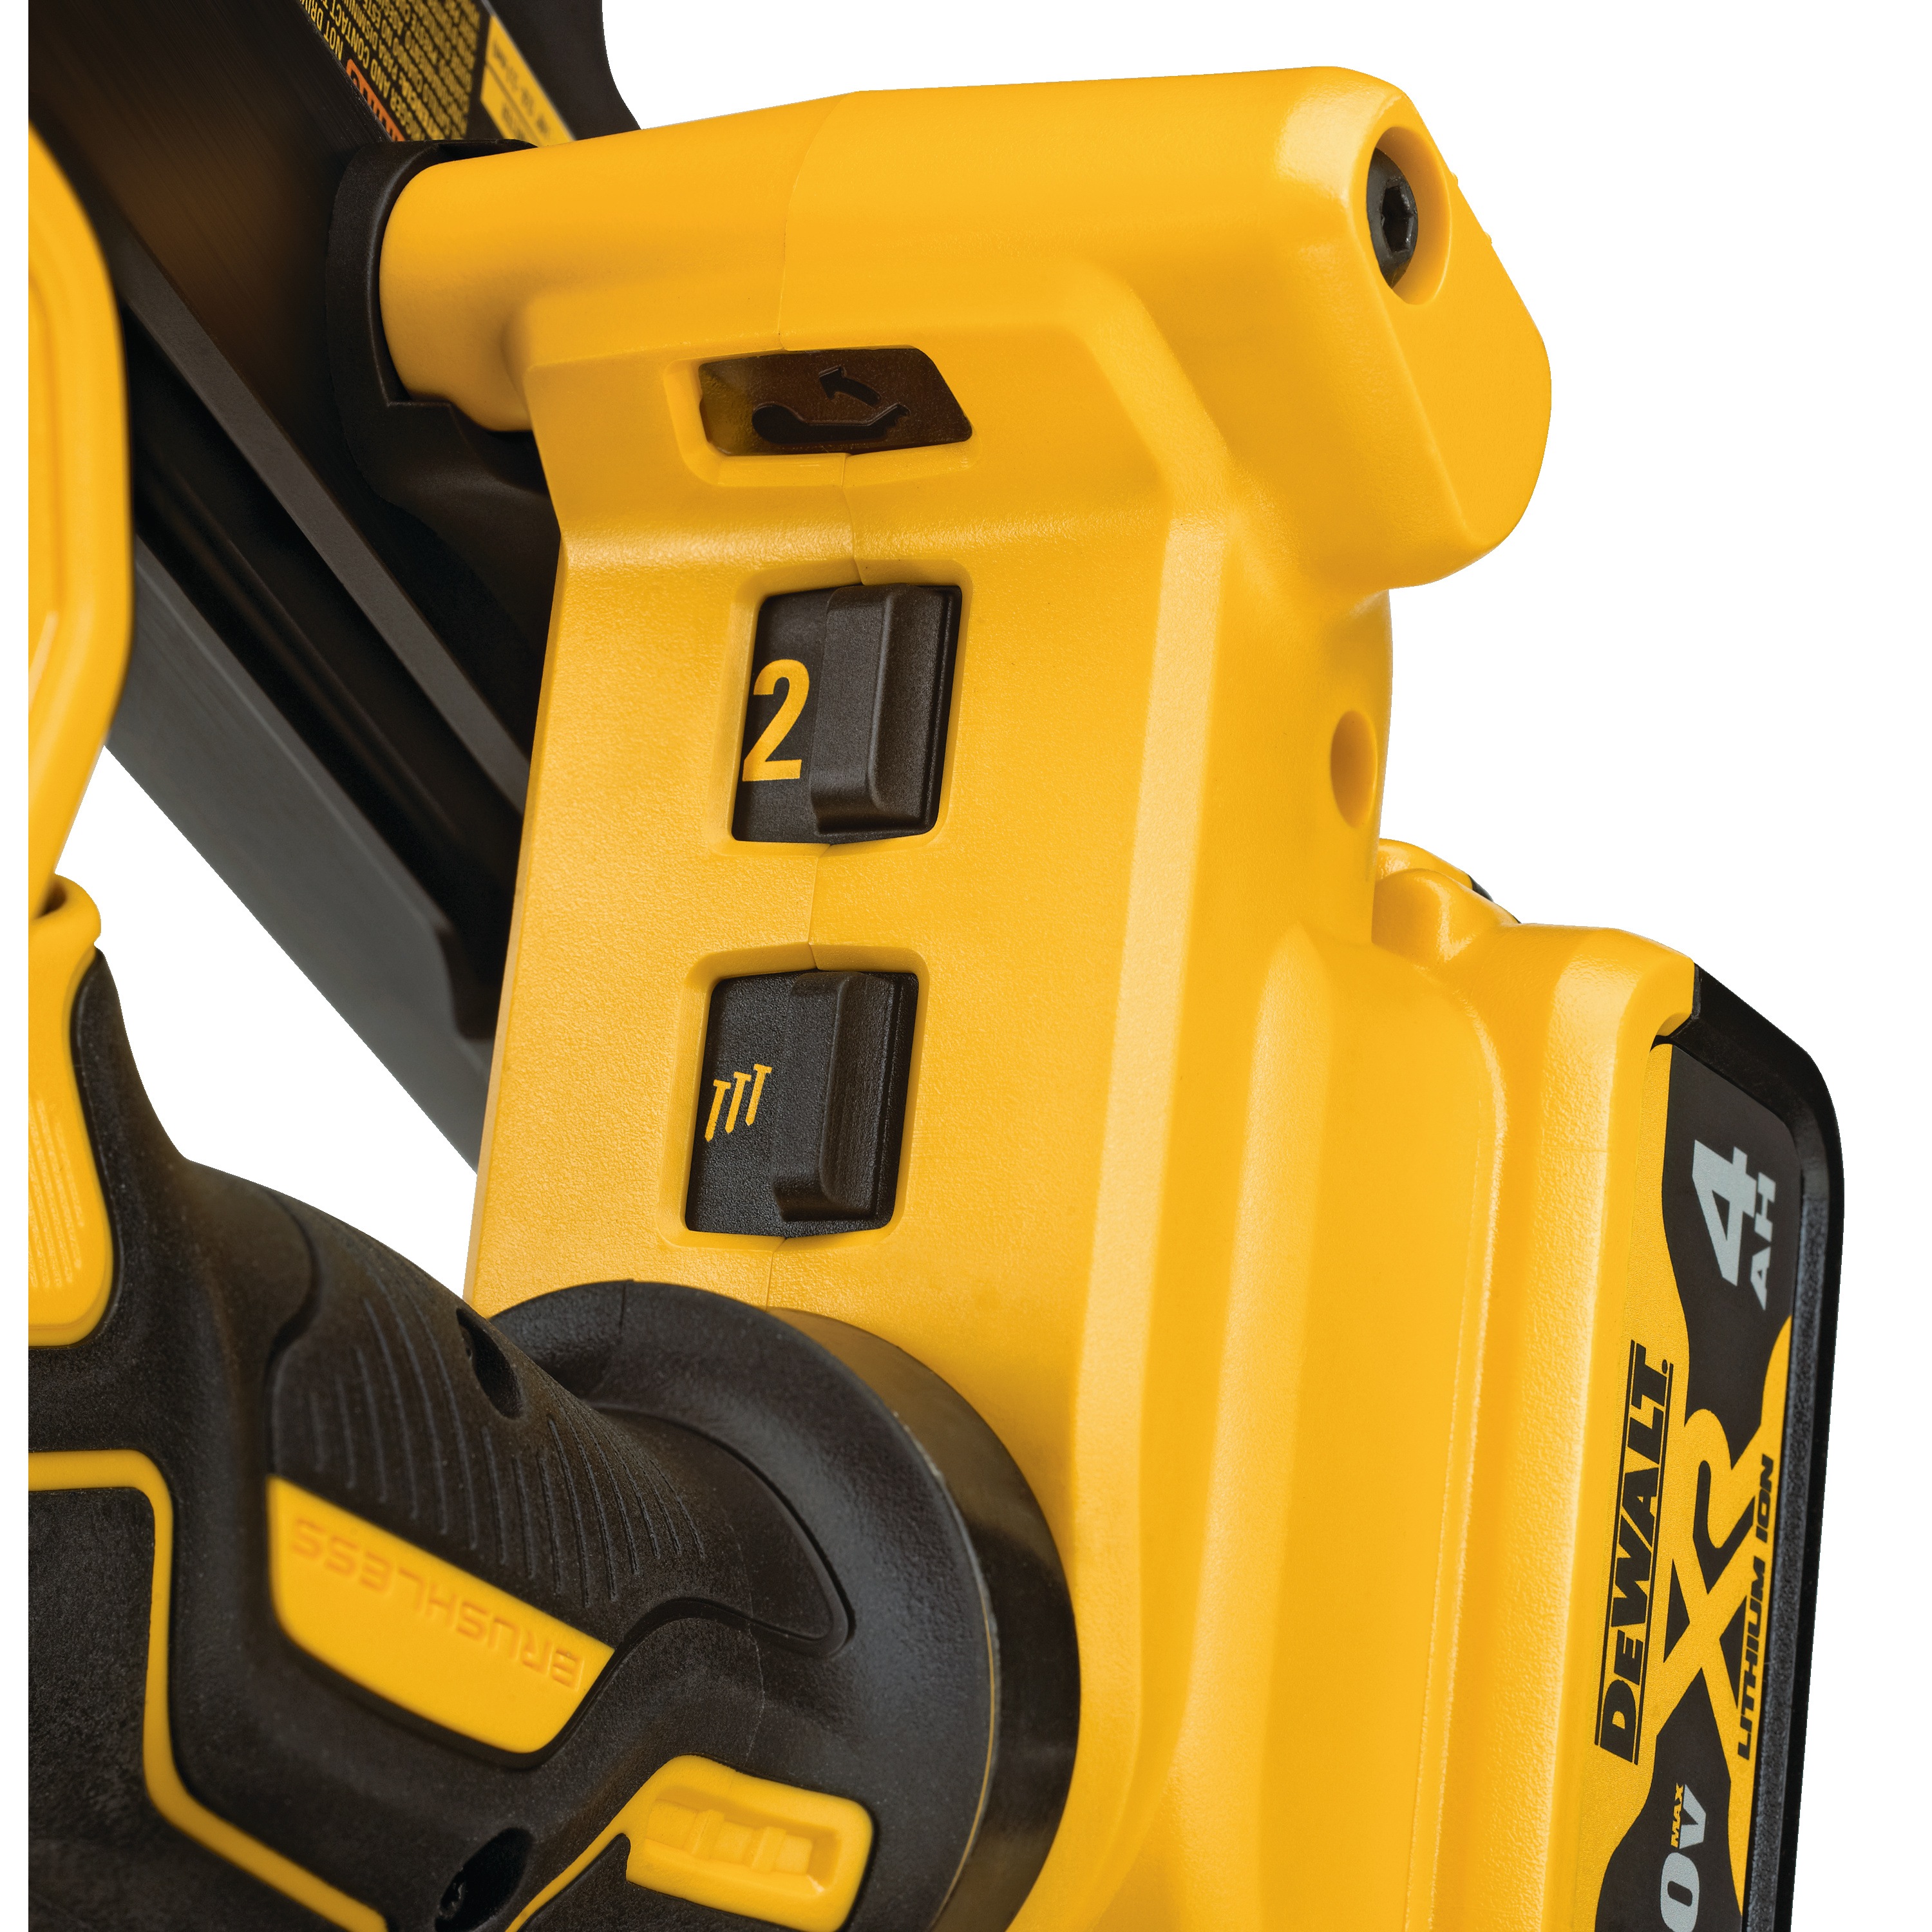 Easy click button feature for setting adjustment of  21 inch Plastic Collated Cordless Nailer